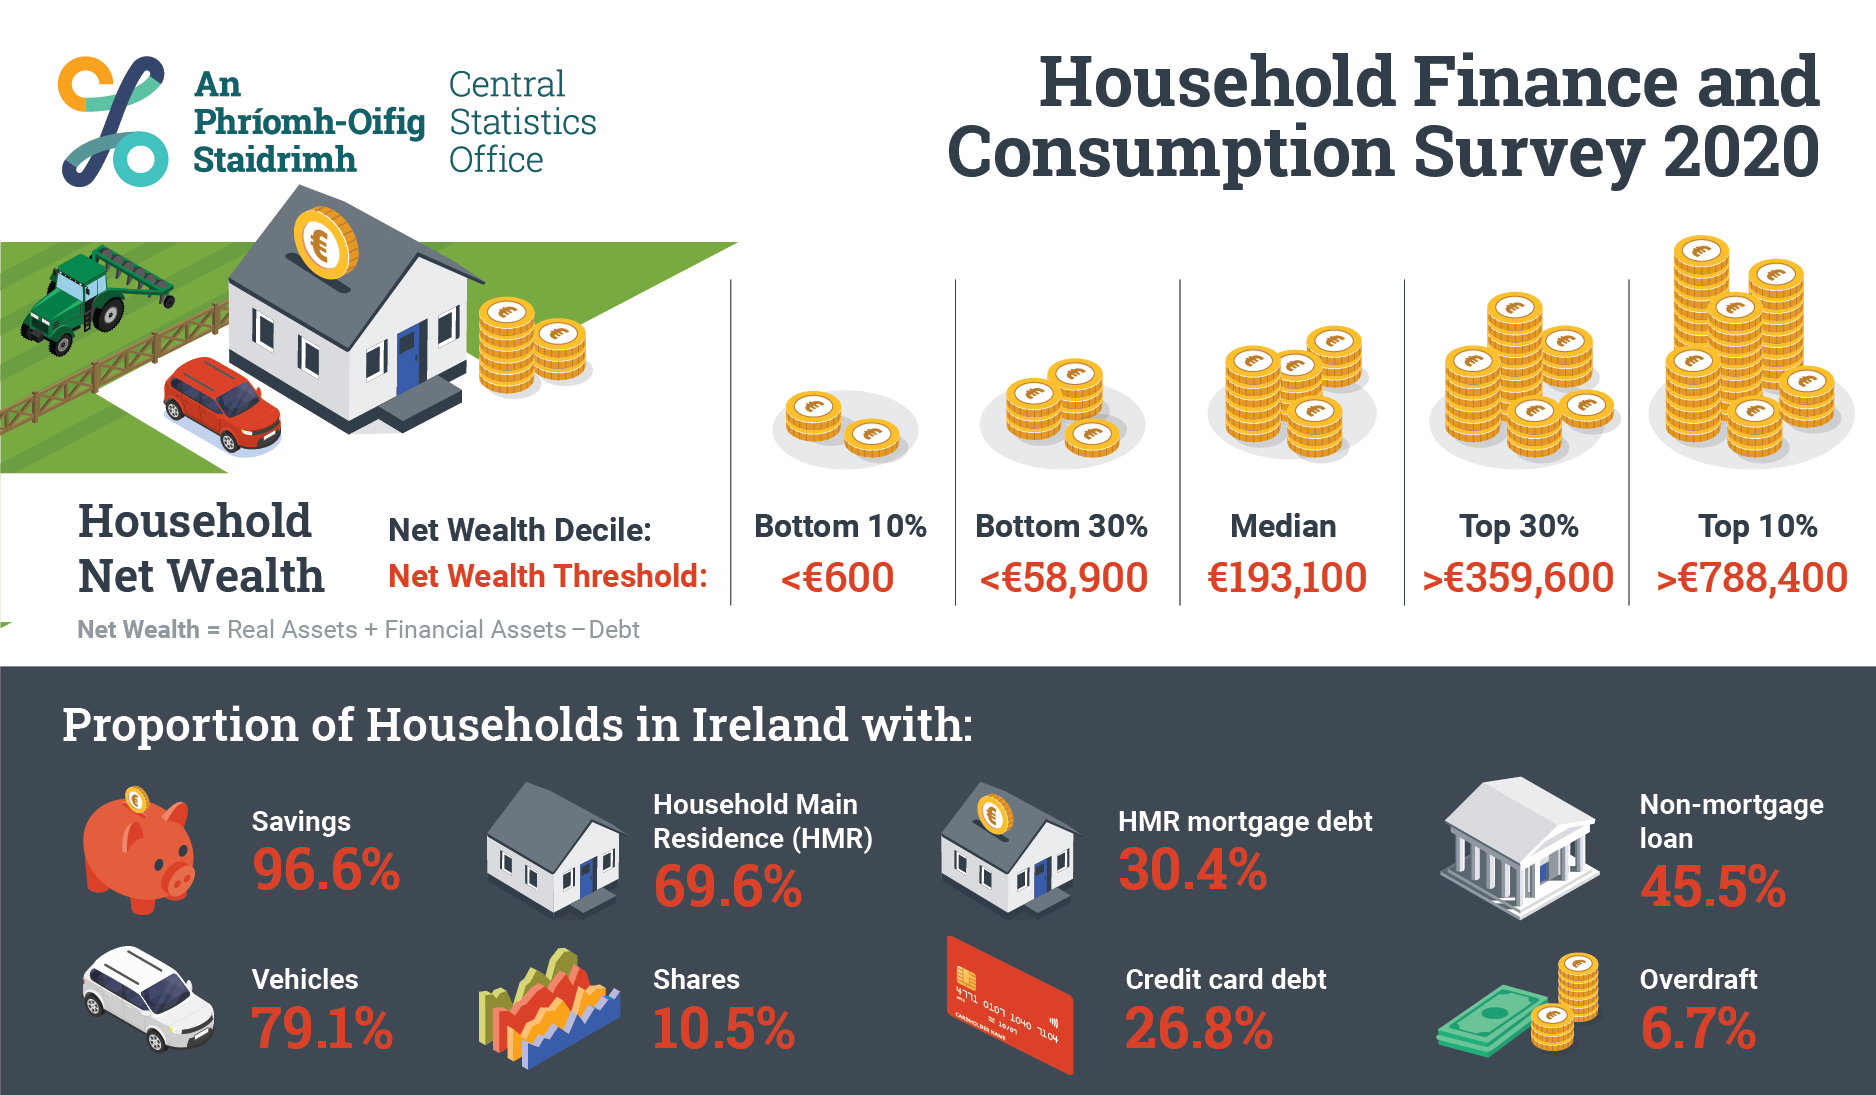 P-HFCS2020 INFOGRAPHIC image